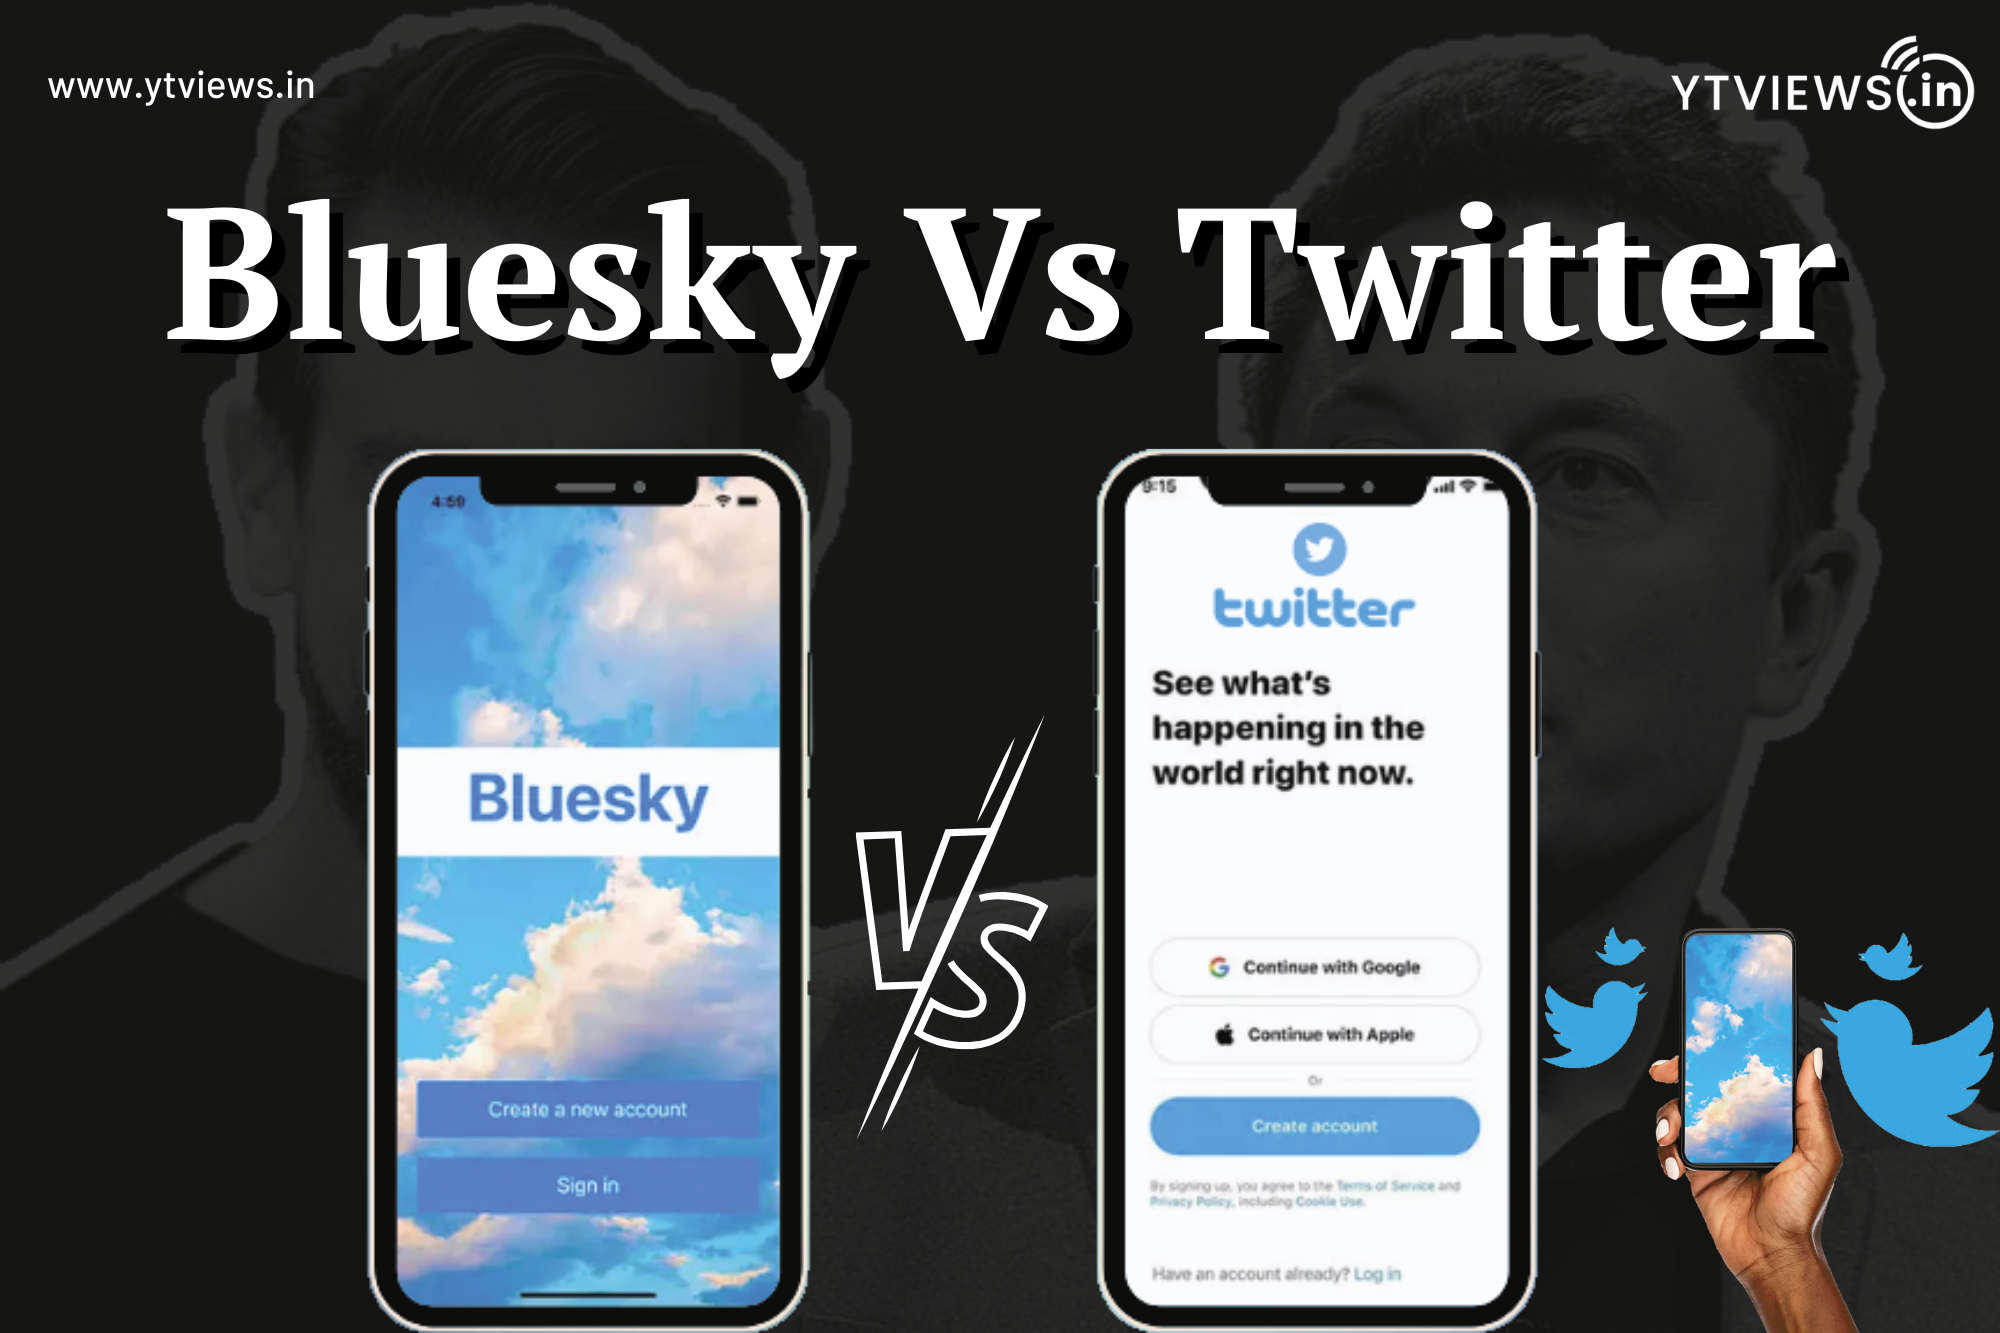 Bluesky introduces AT Protocol for its users and this feature has announced them as a potential Twitter rival